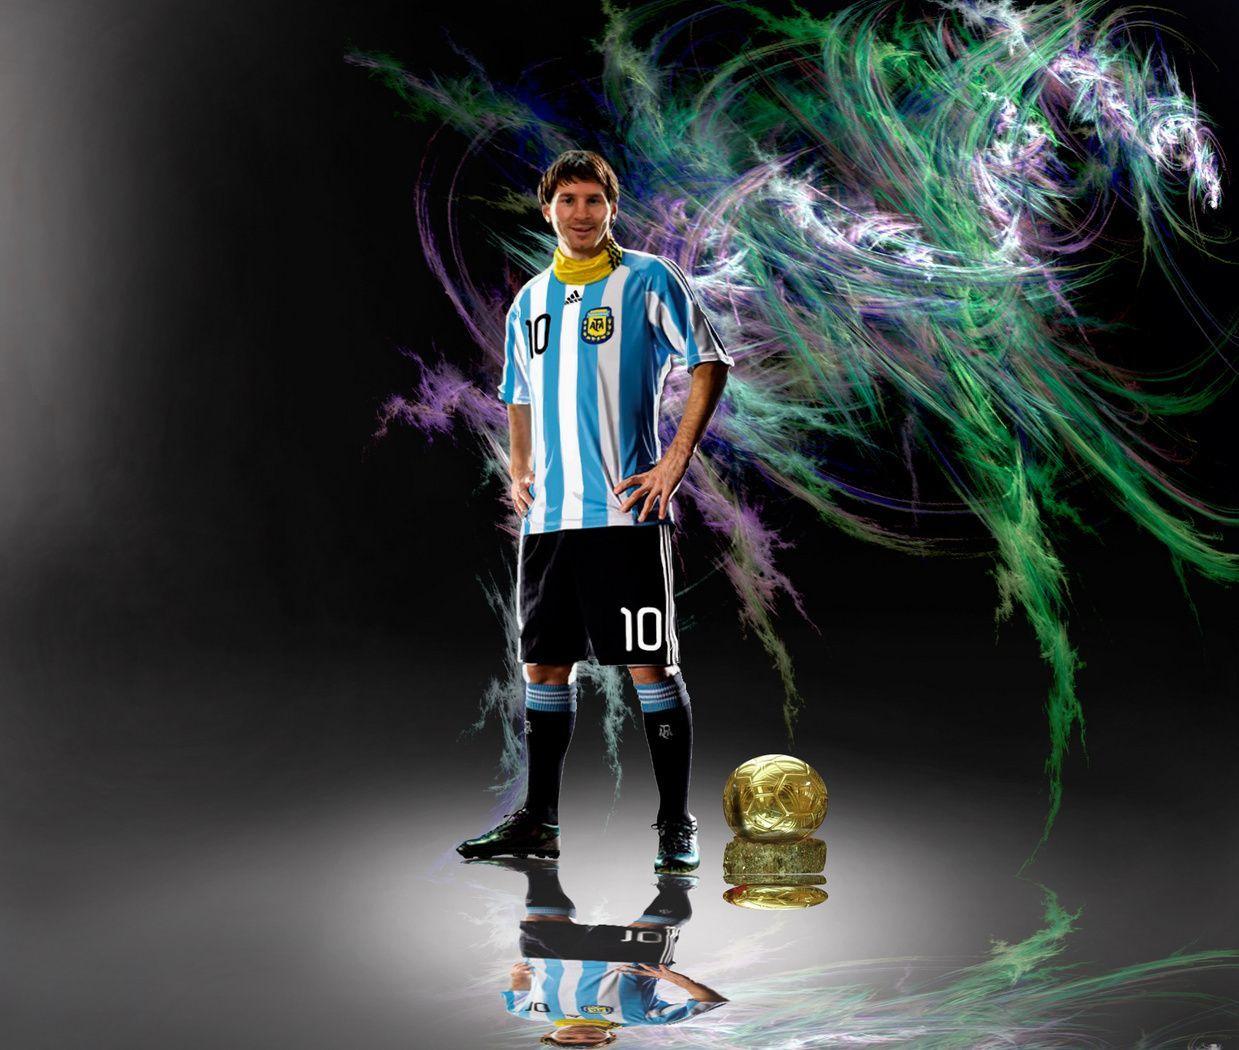 Messi In Argentina Wallpapers Wallpaper Cave